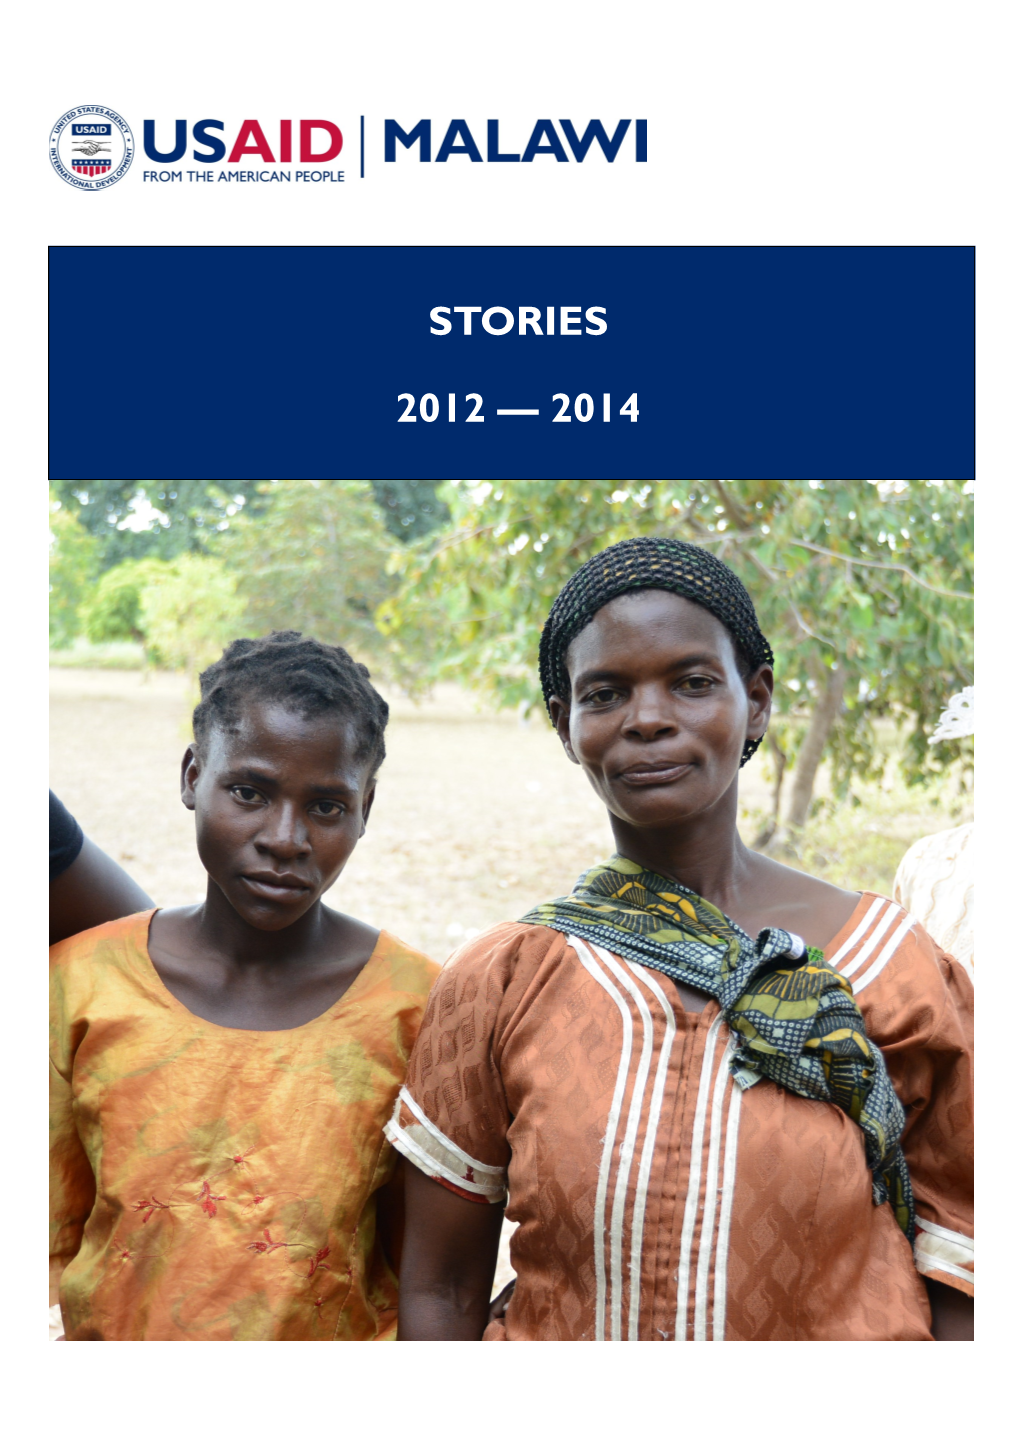 A Collection of Stories from the Malawi Mission from 2012 to 2014